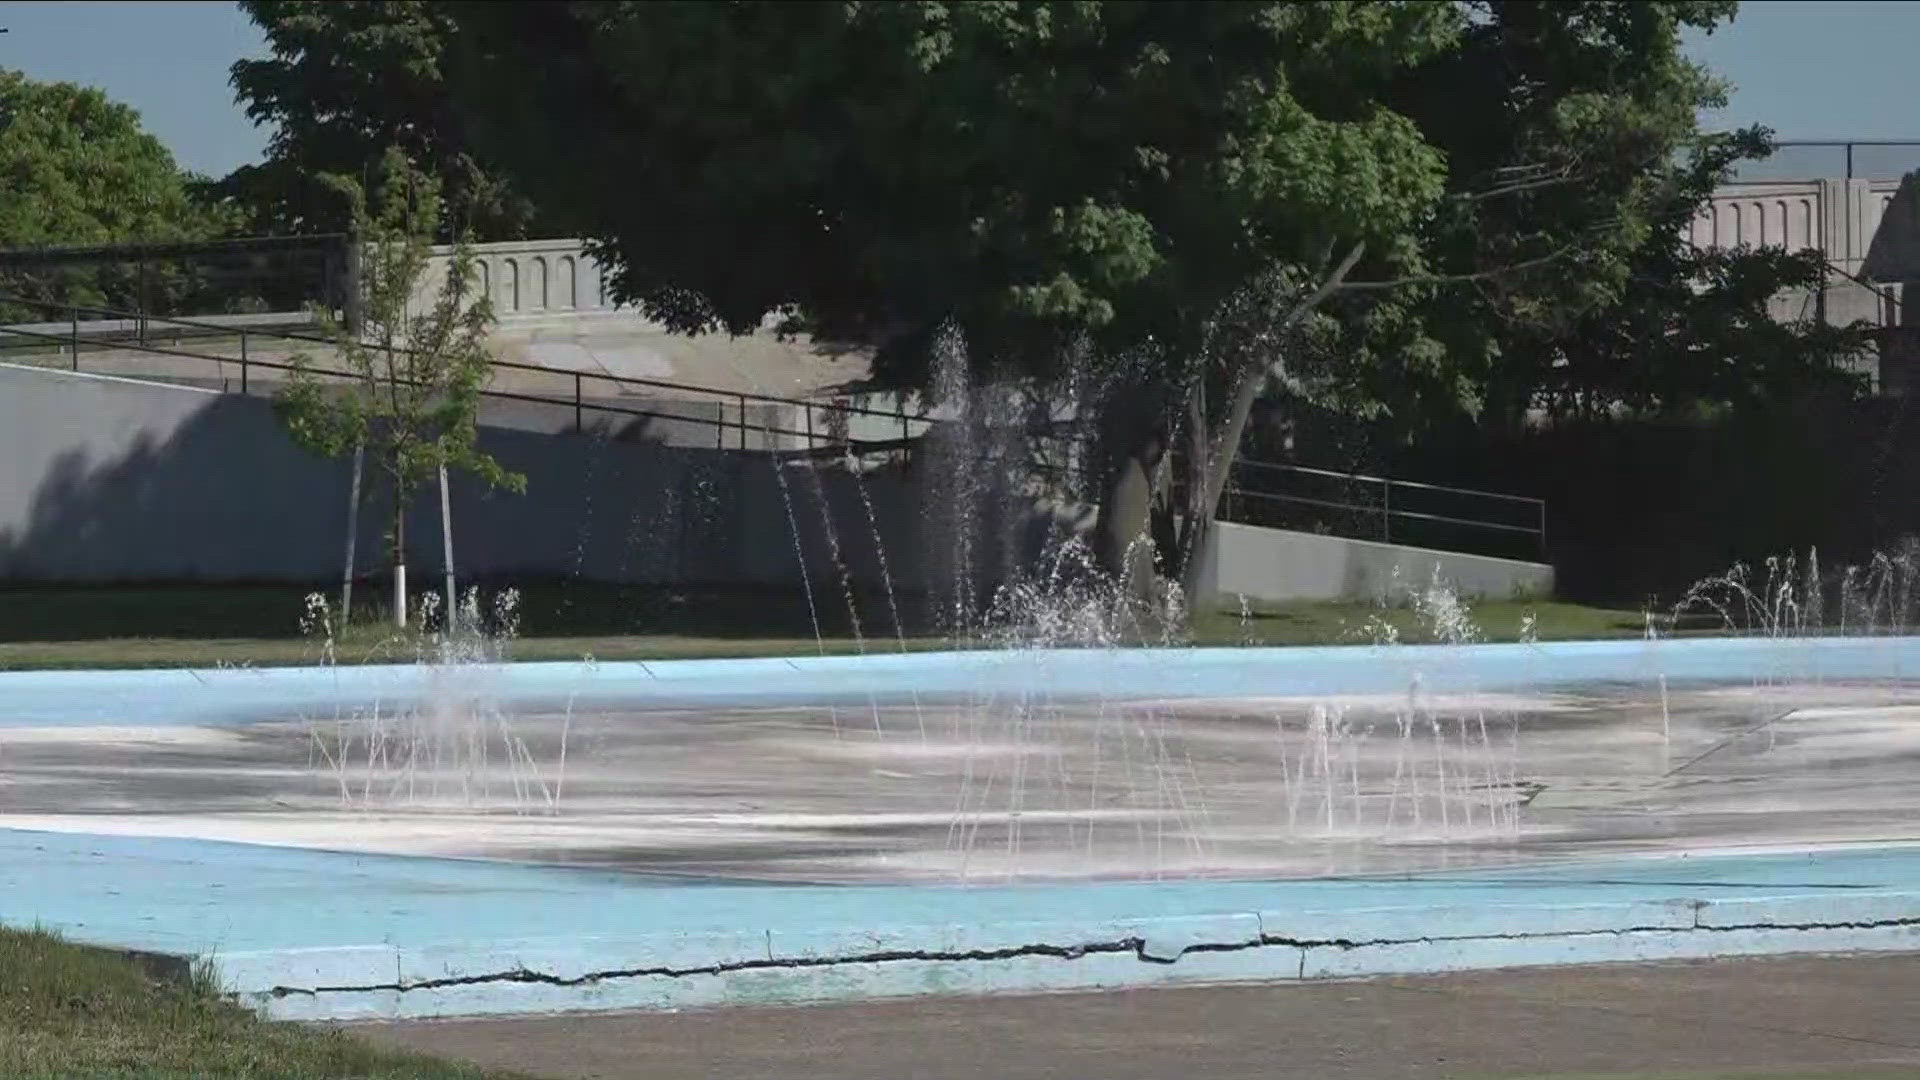 The city's 10 splash pads will be open Saturday, Sunday, and Monday from 11 a.m. until 7 p.m.